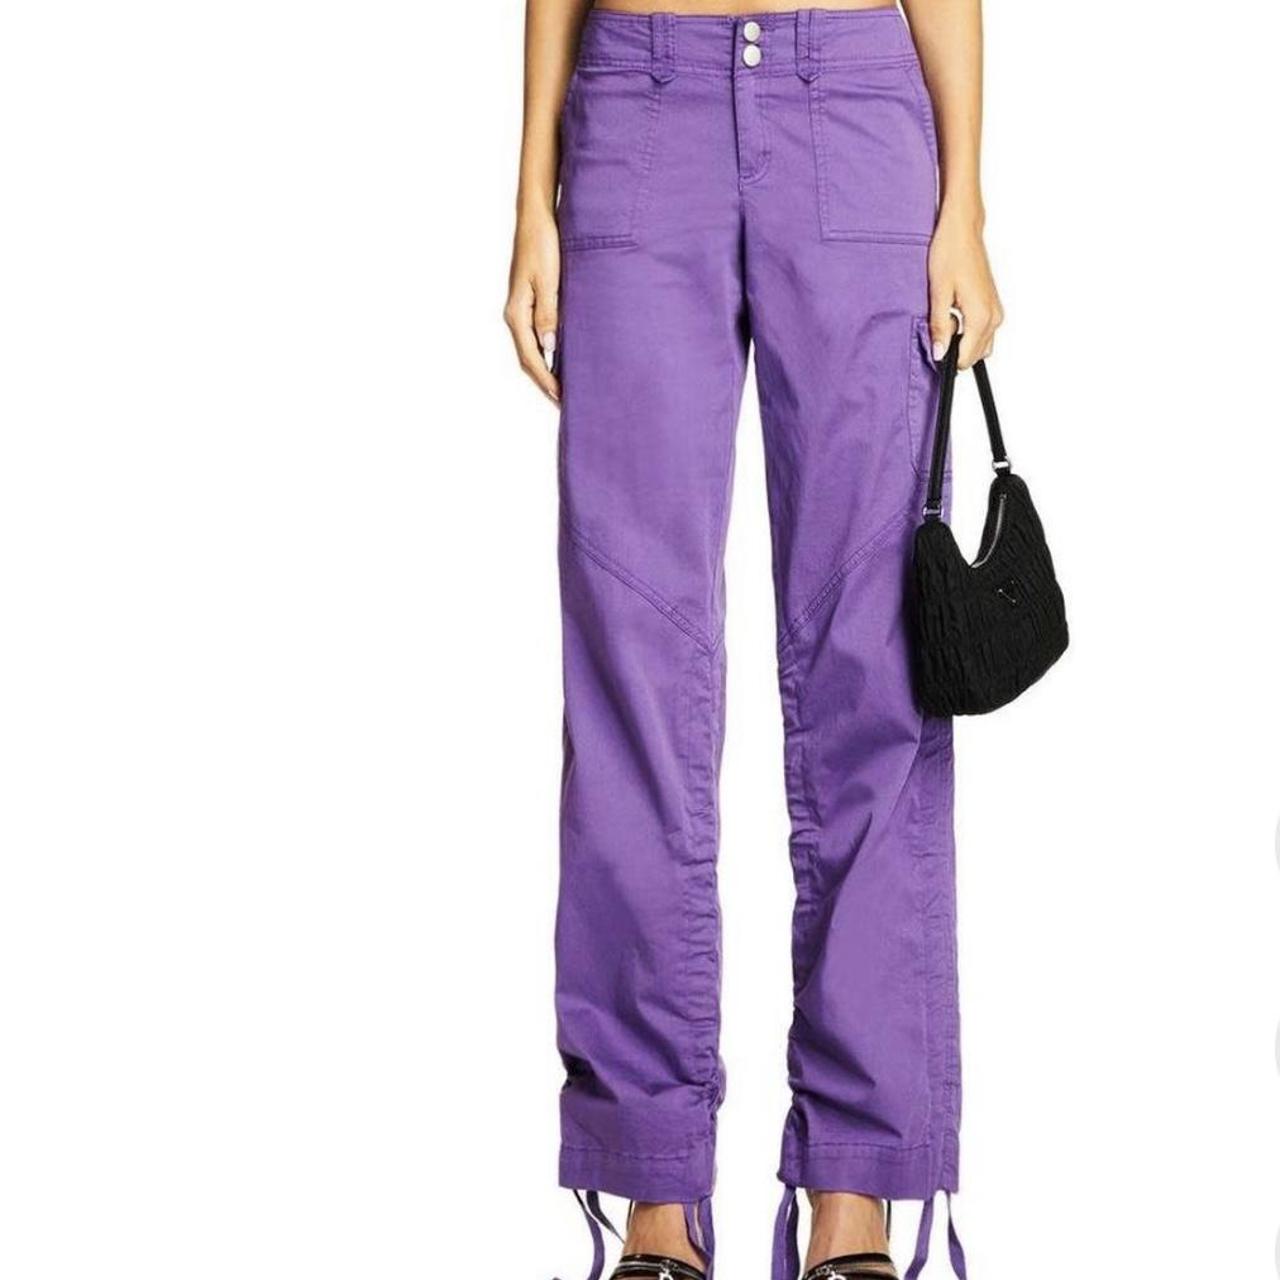 I.AM.GIA Purple Cargo Pants Sold out on website. - Depop